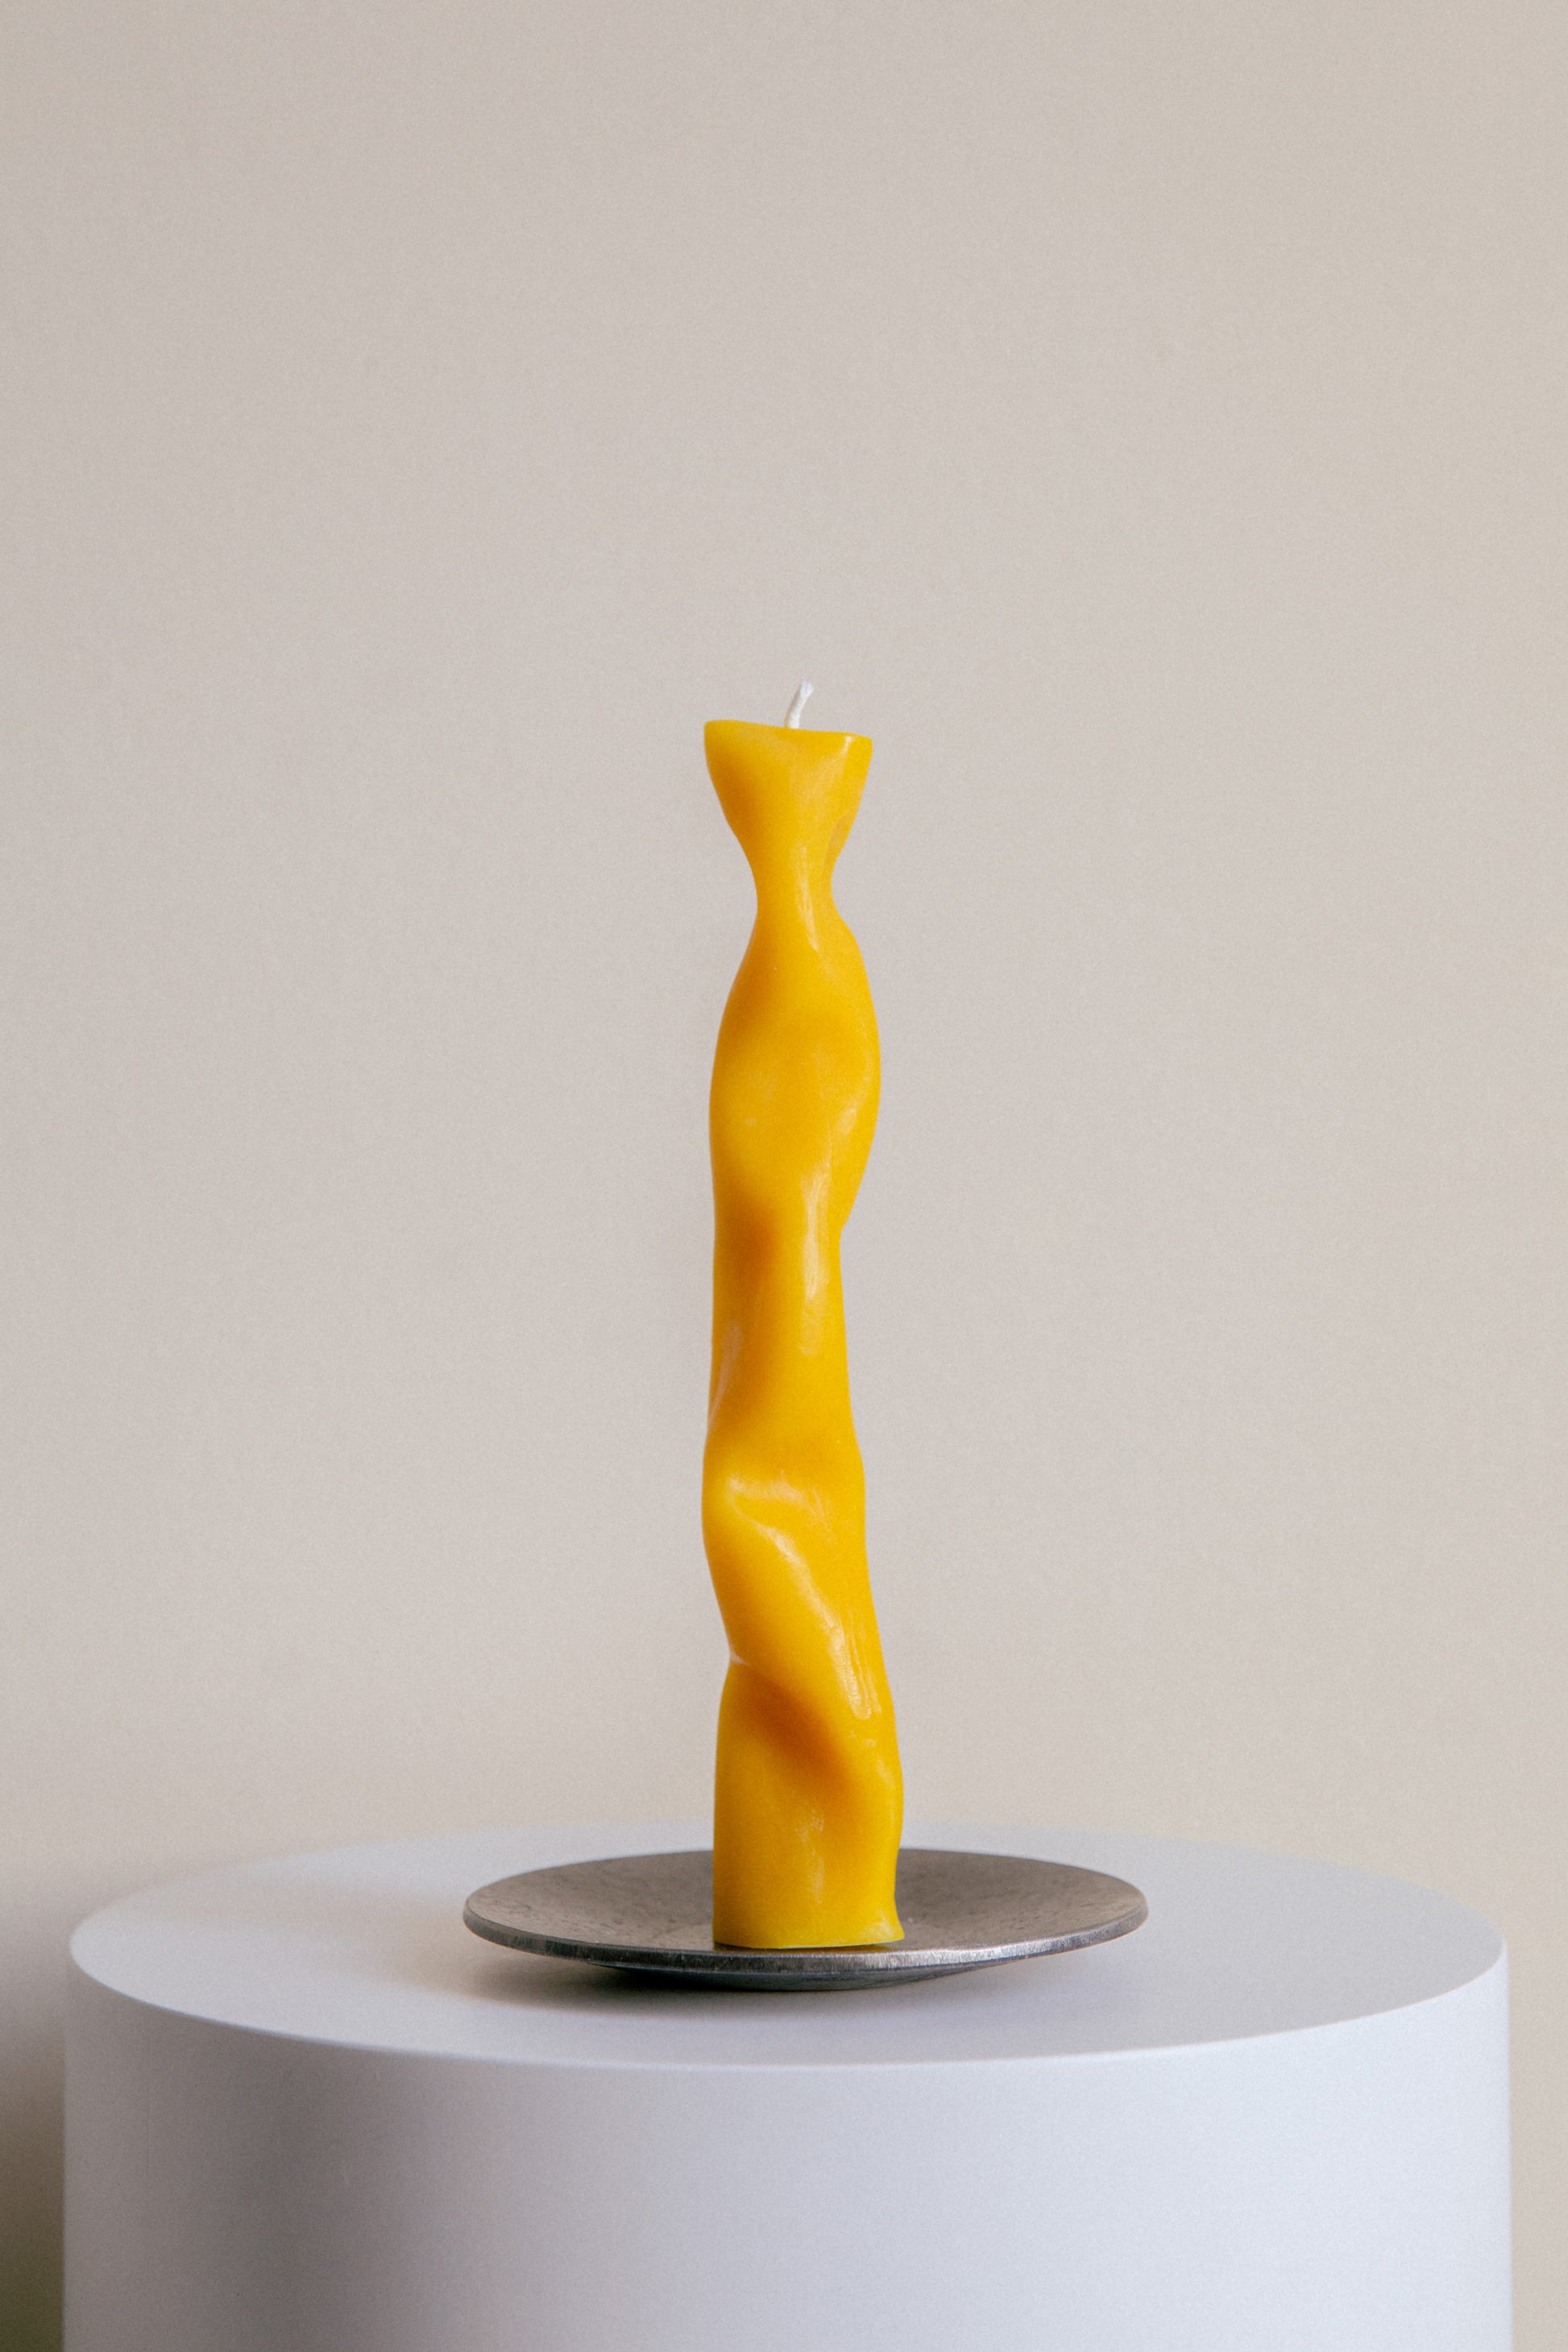 Handcrafted Iron Candle Holder with a Thorn in Silver-Grey-Black with a Wavy Sculptural Candle Made from Yellow Beeswax